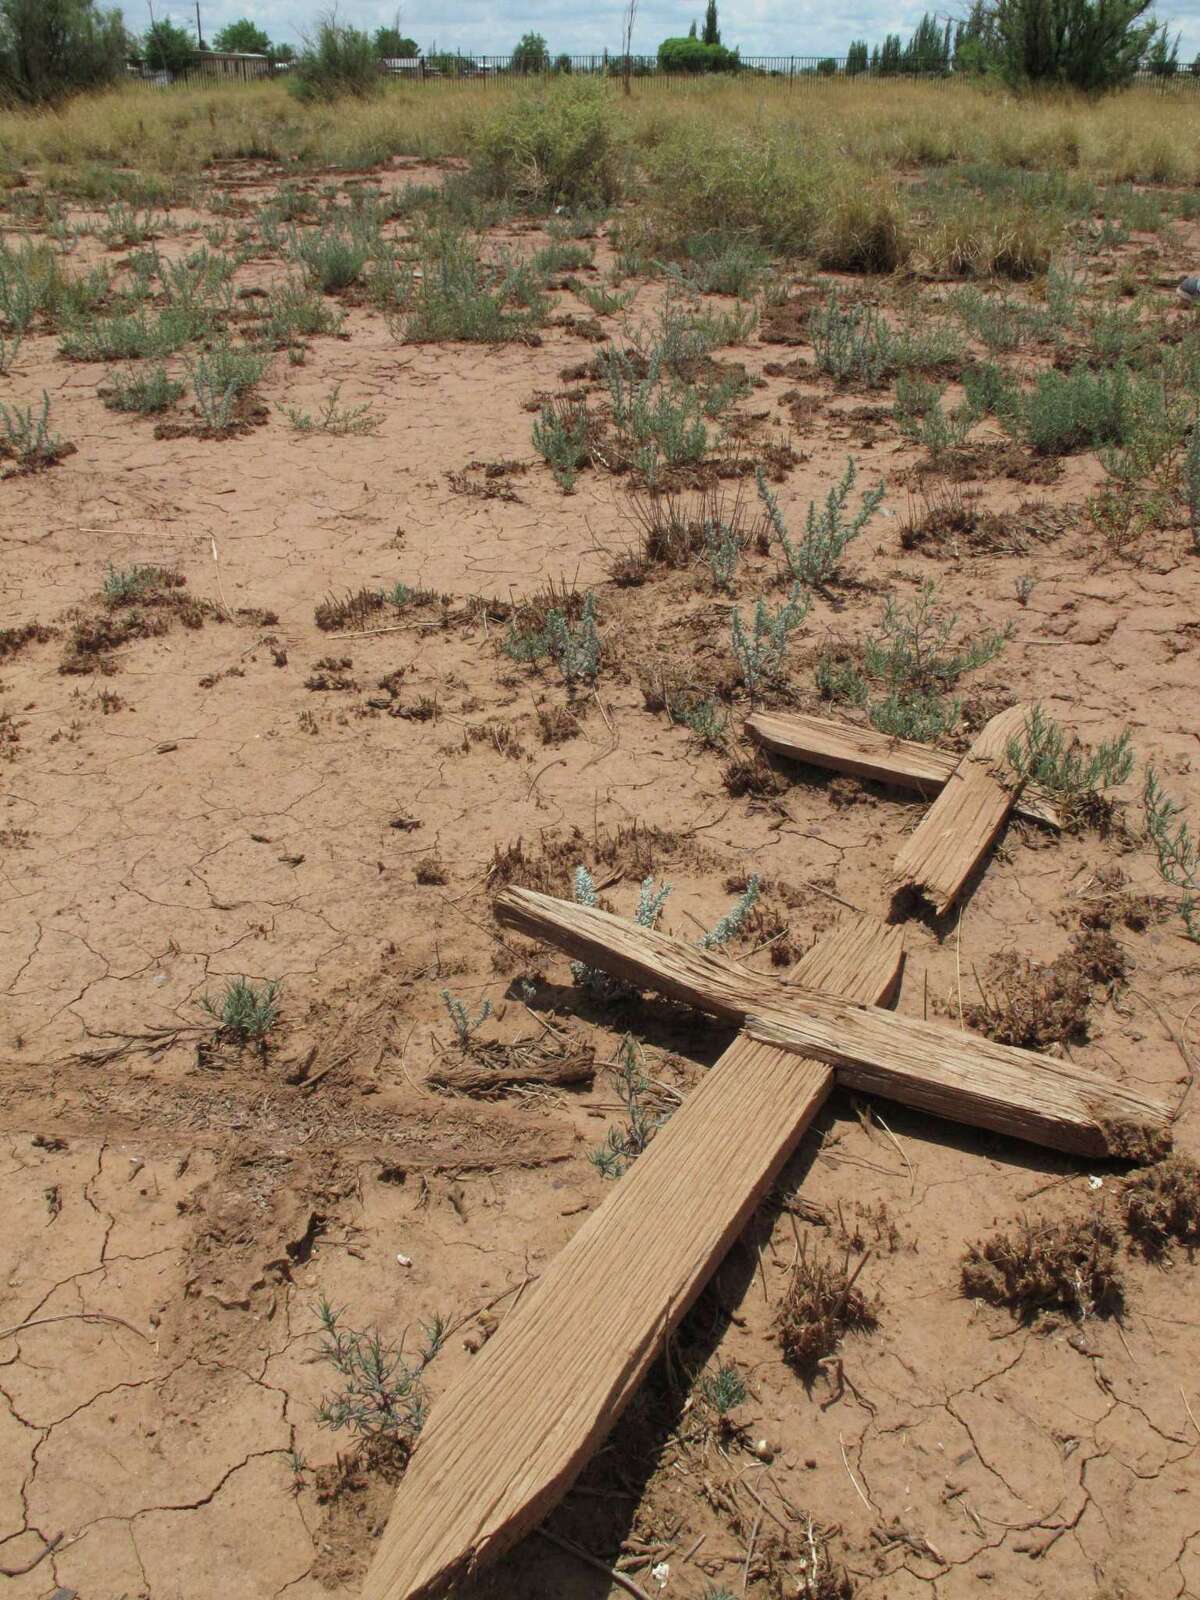 This July 9, 2014 photos shows wooden crosses lying in a dusty cemetery in Winslow, Arizona. Local historic preservation Commissioner Gail Sadler has made it her mission to unearth the identities of roughly 600 people buried there and help their descendants reconnect with a lost part of their history. (AP Photo/Felicia Fonseca)